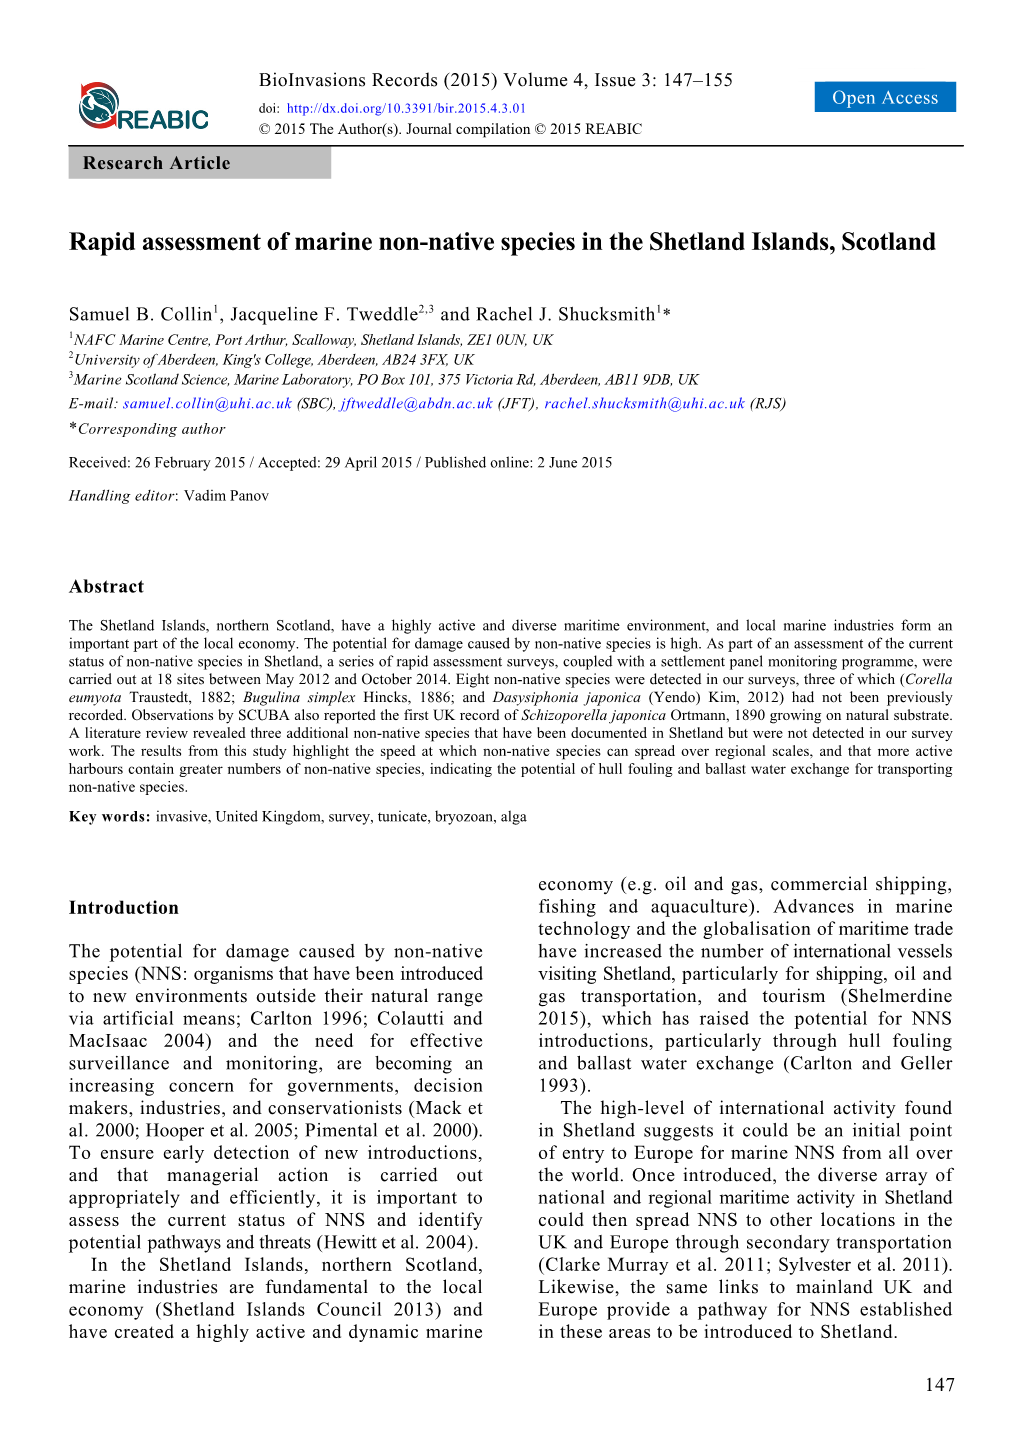 Rapid Assessment of Marine Non-Native Species in the Shetland Islands, Scotland